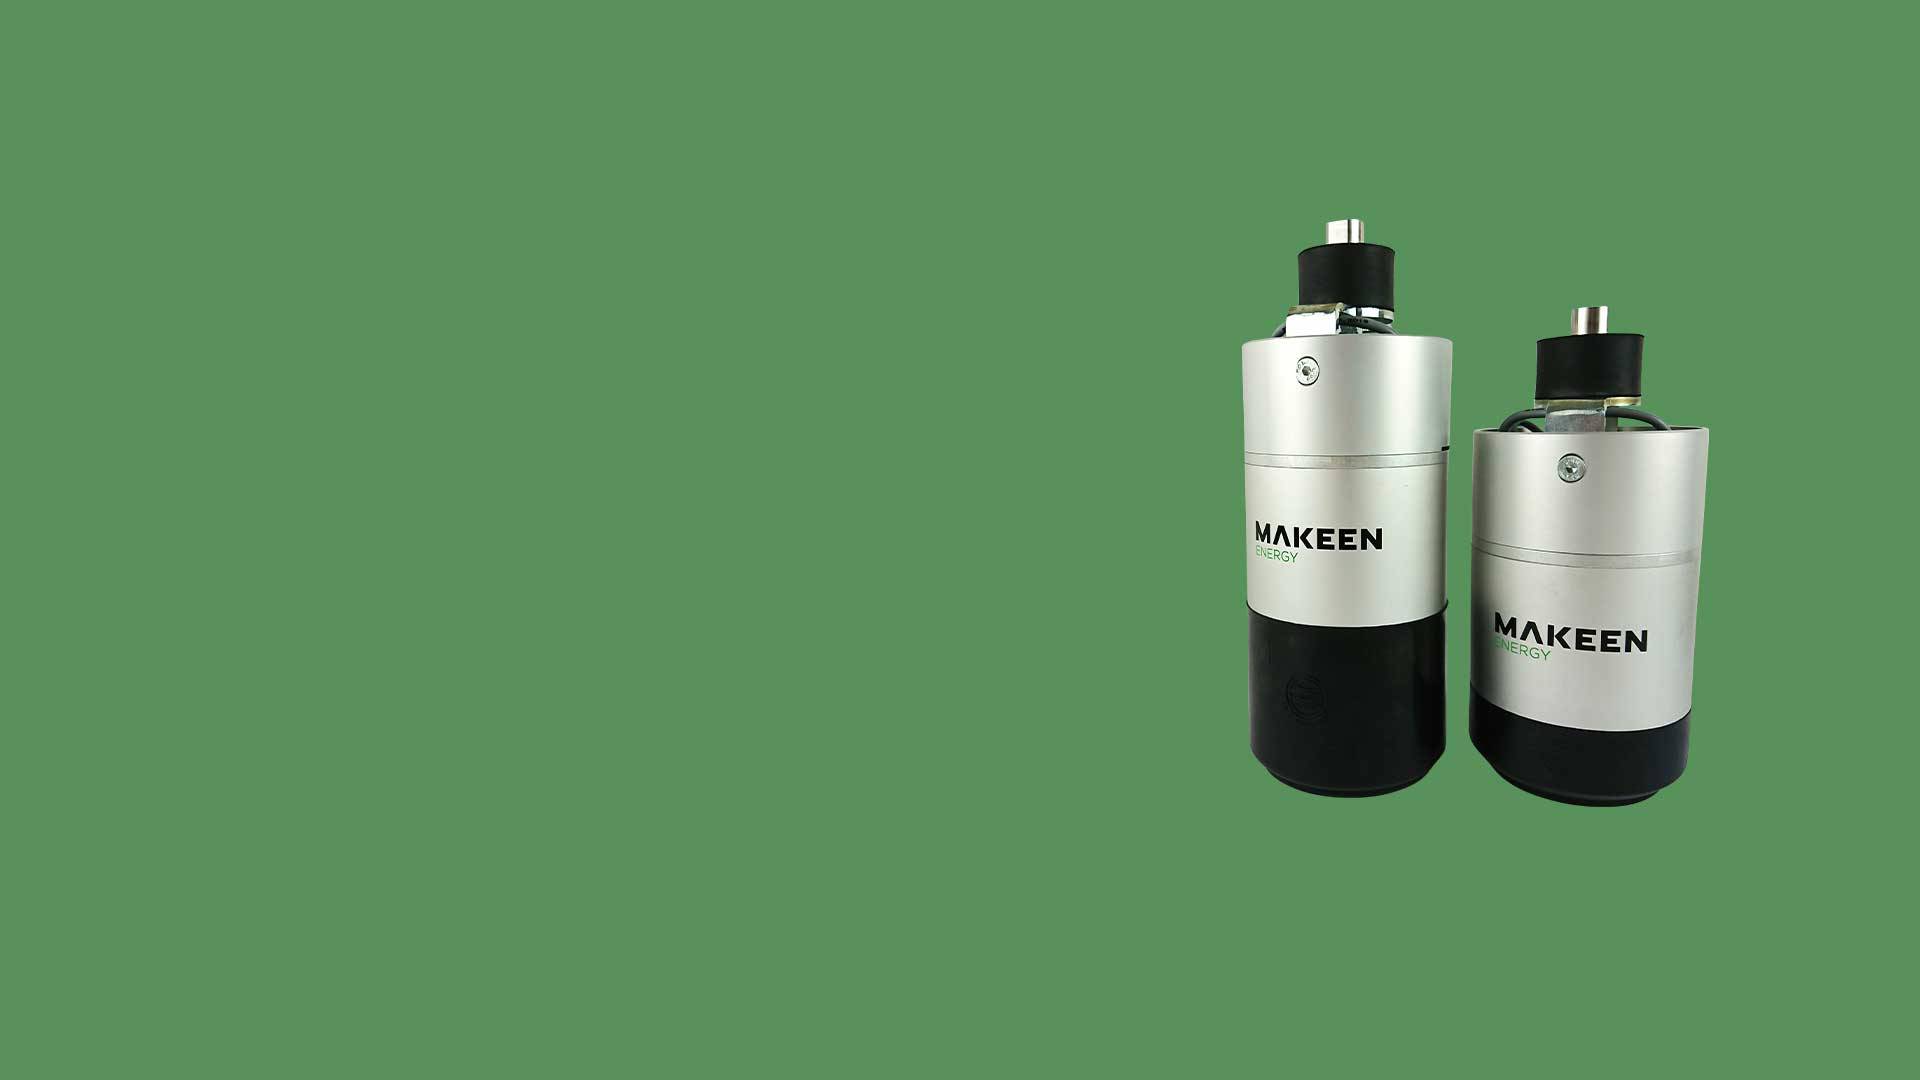 Always innovating safety | MAKEEN Energy